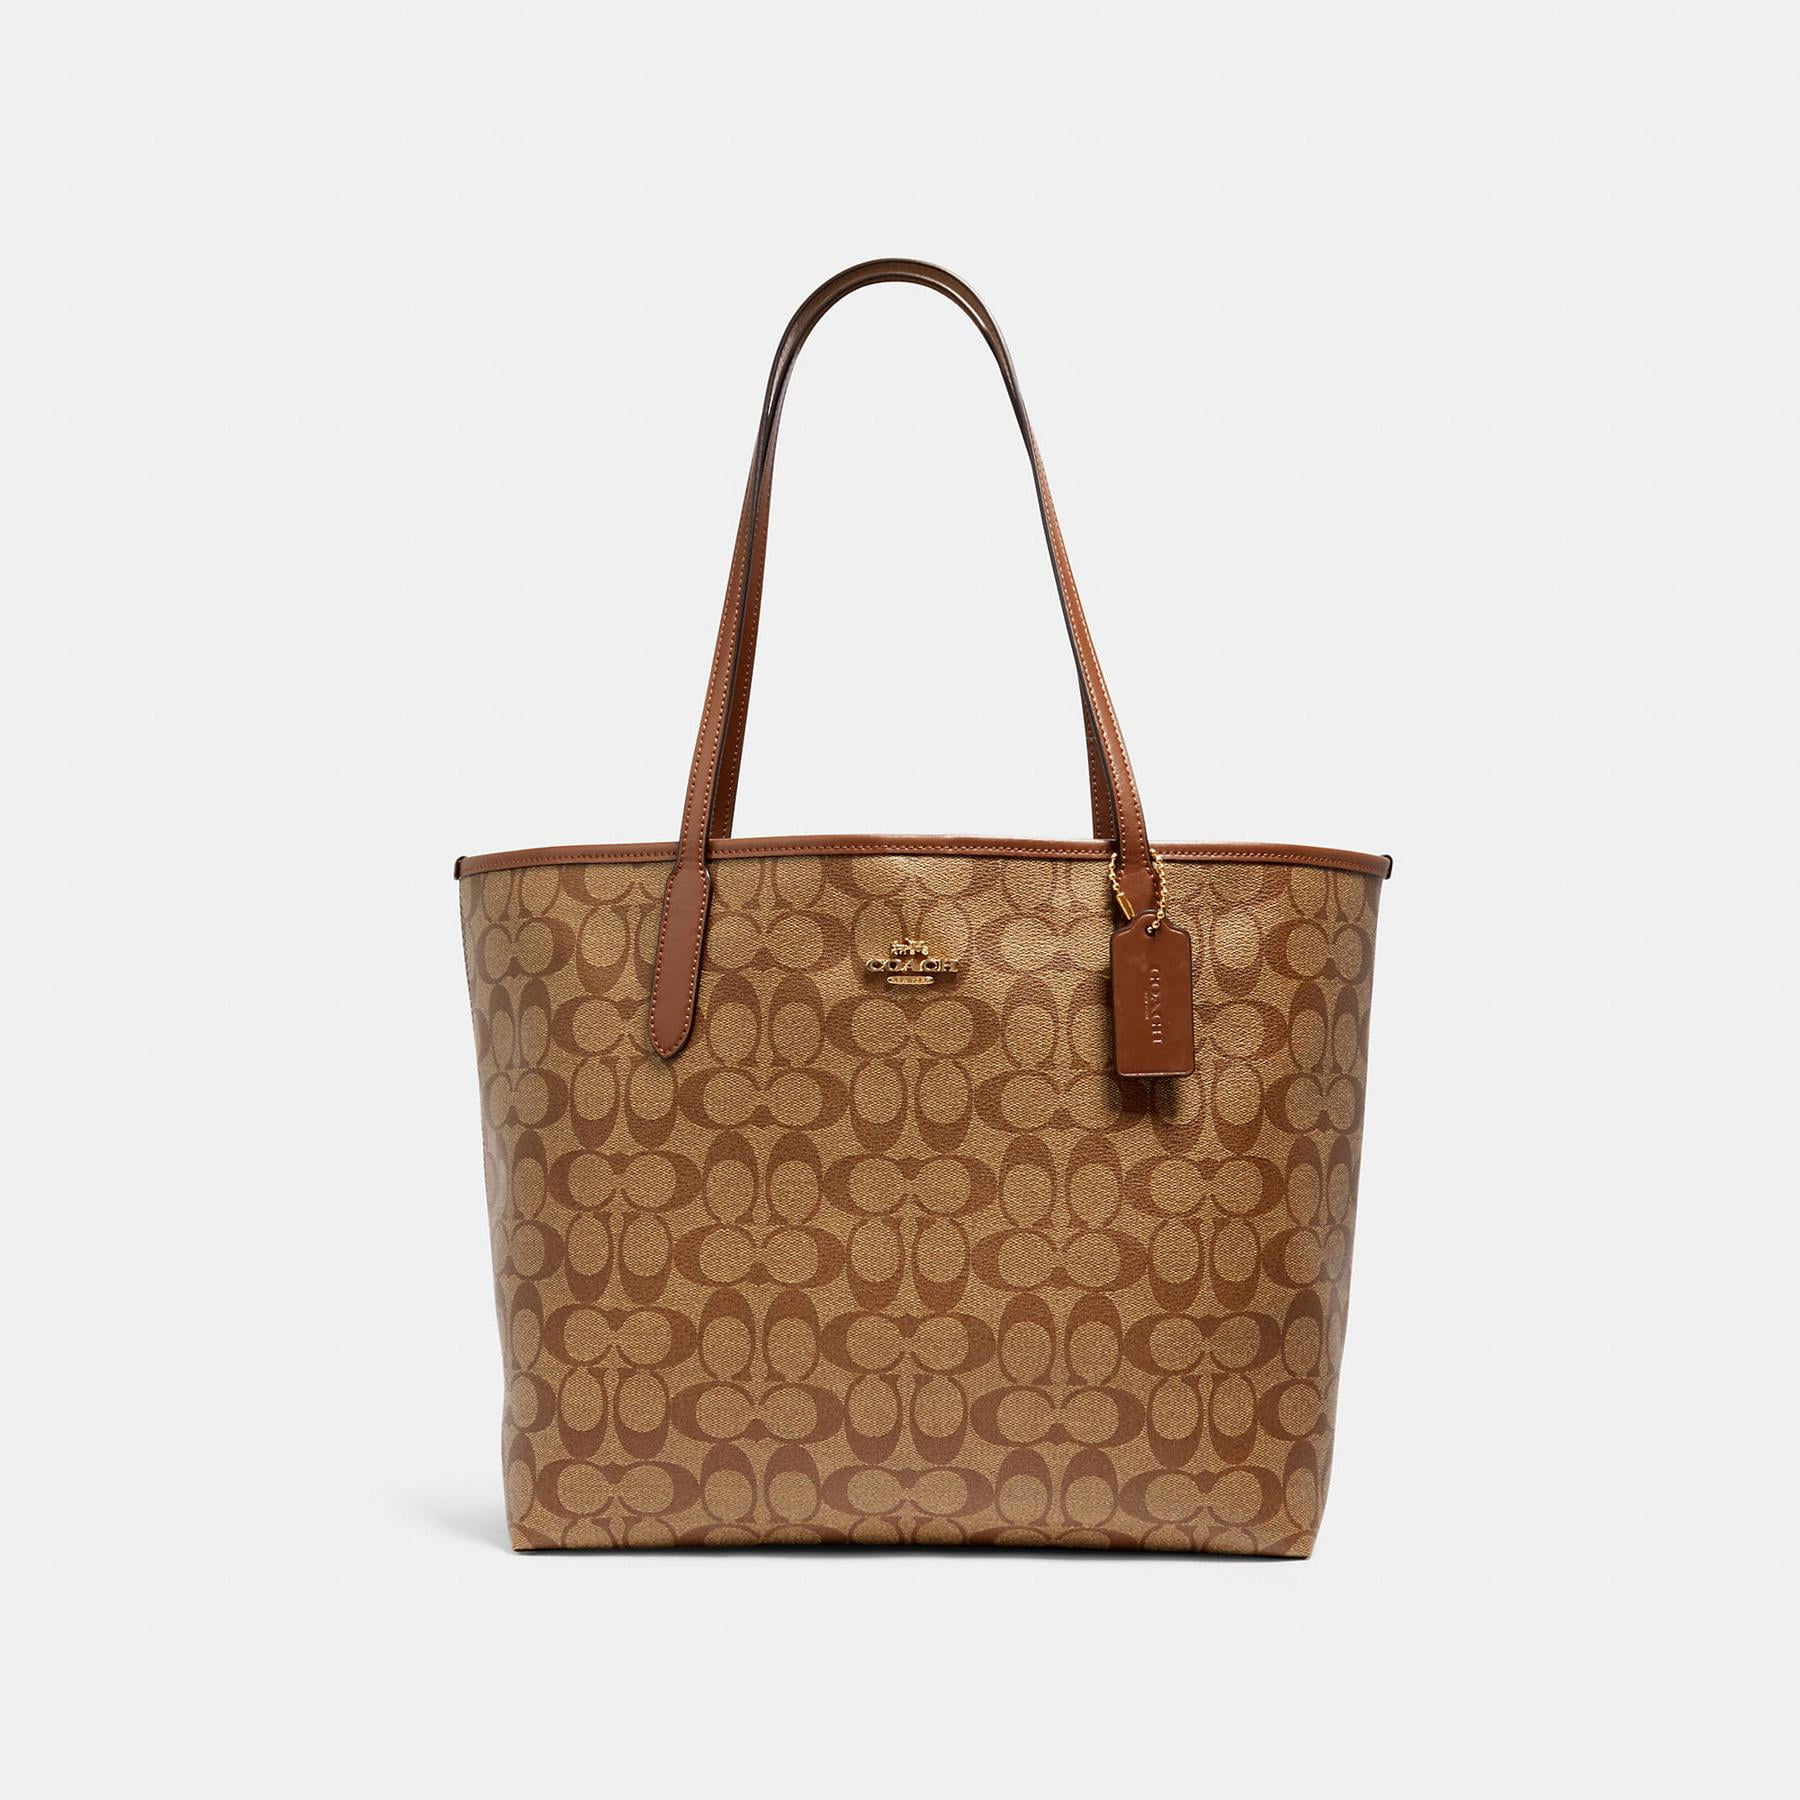 COACH Tote Bags for Women